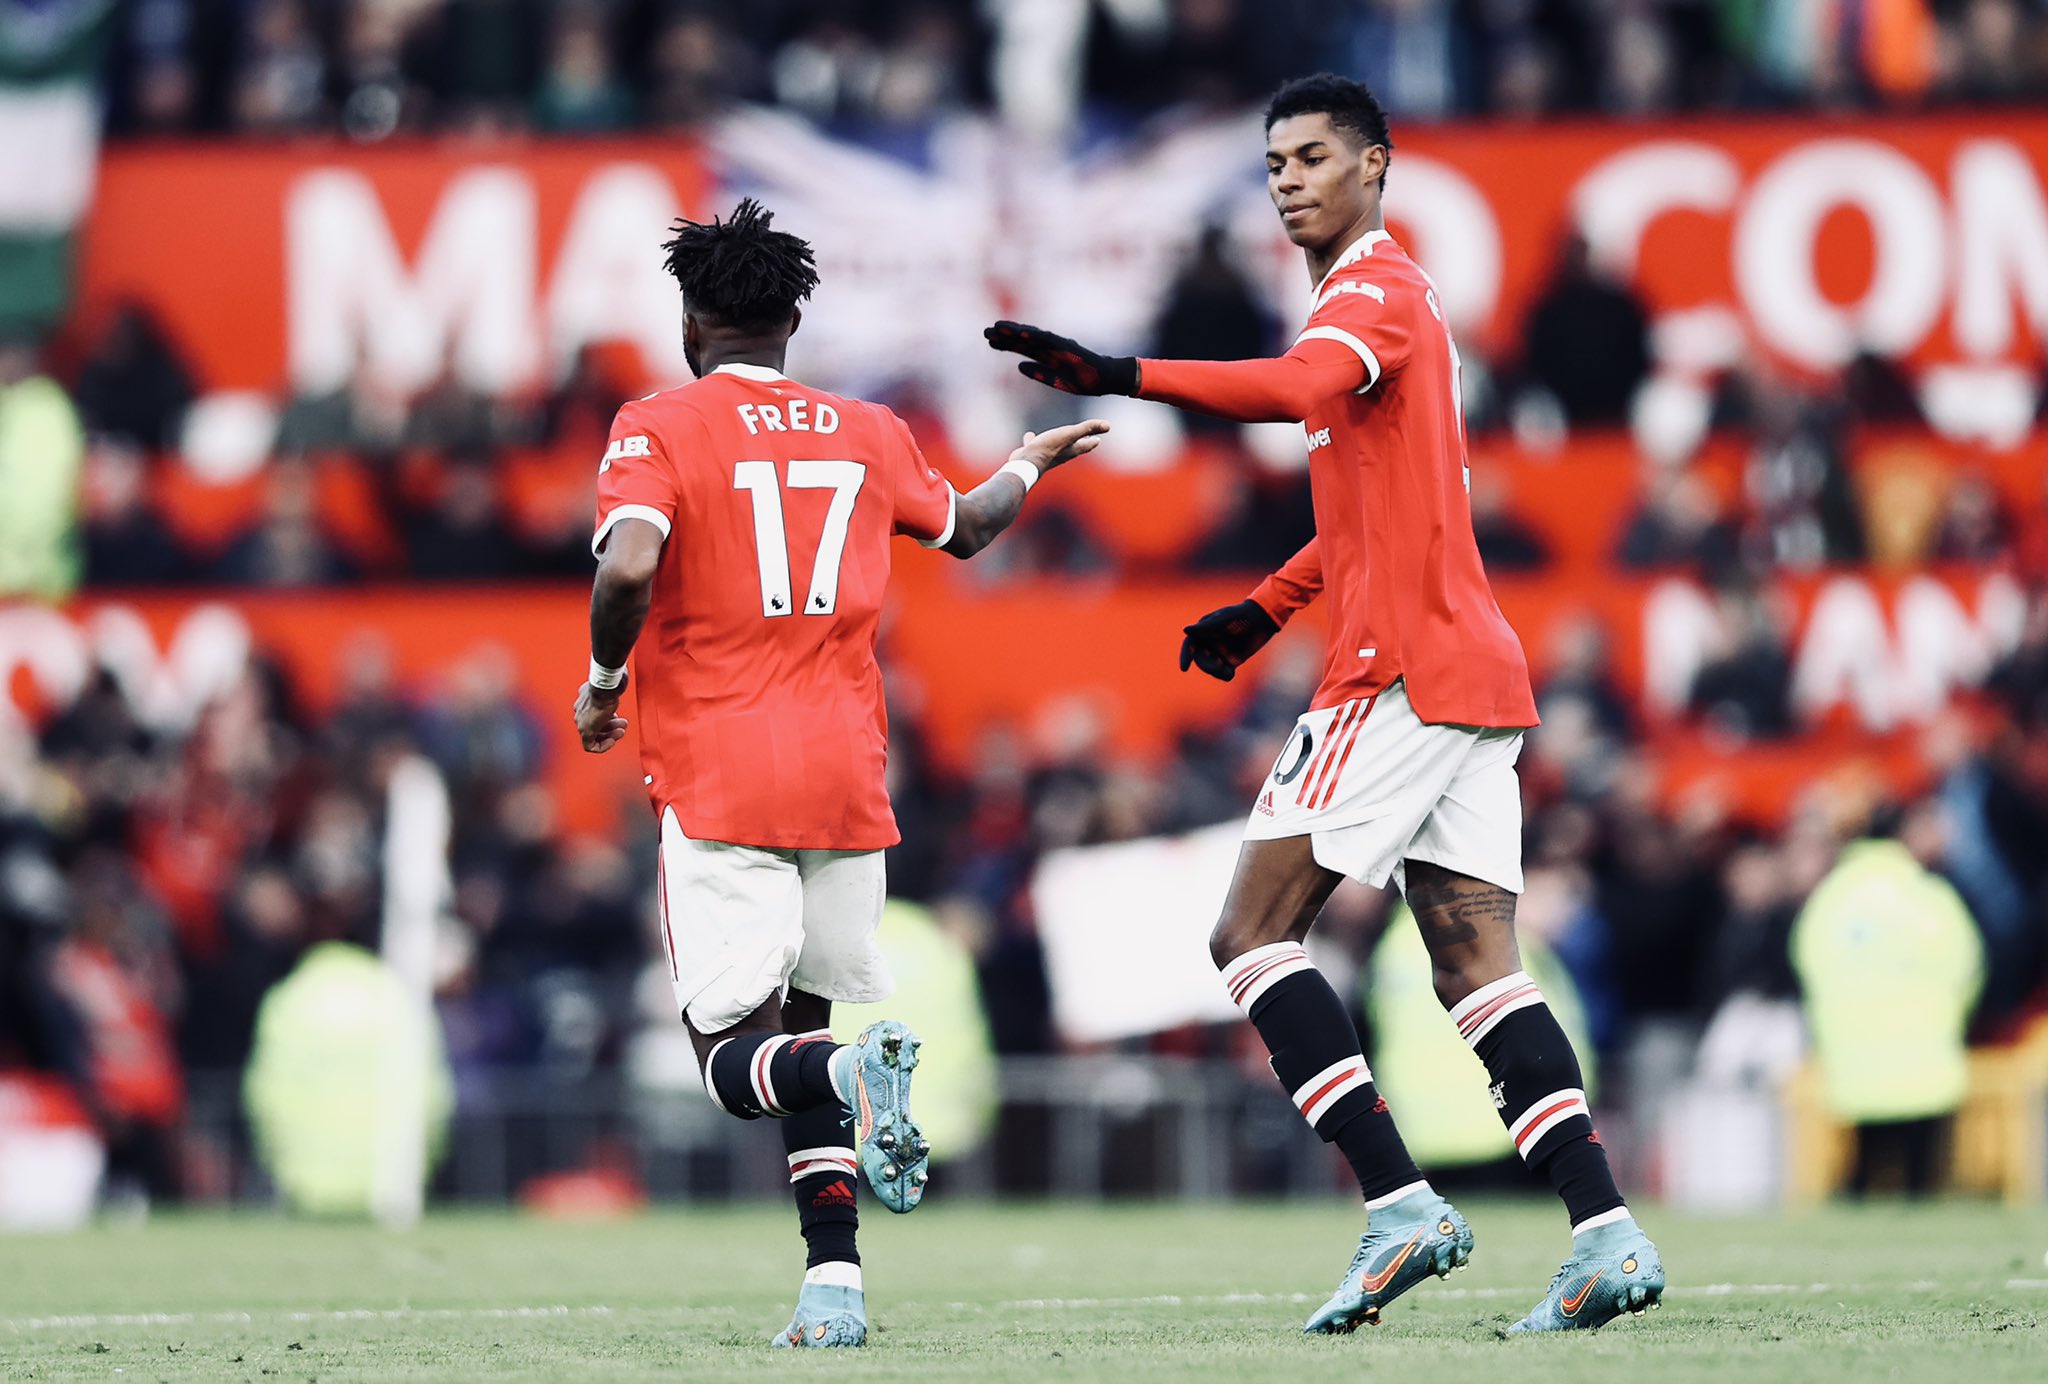 Manchester United 1-1 Leicester City Live: Man United SURVIVE Leicester scare as Fred scores the equaliser before Maddison's winner is ruled out by VAR - Check Match Report